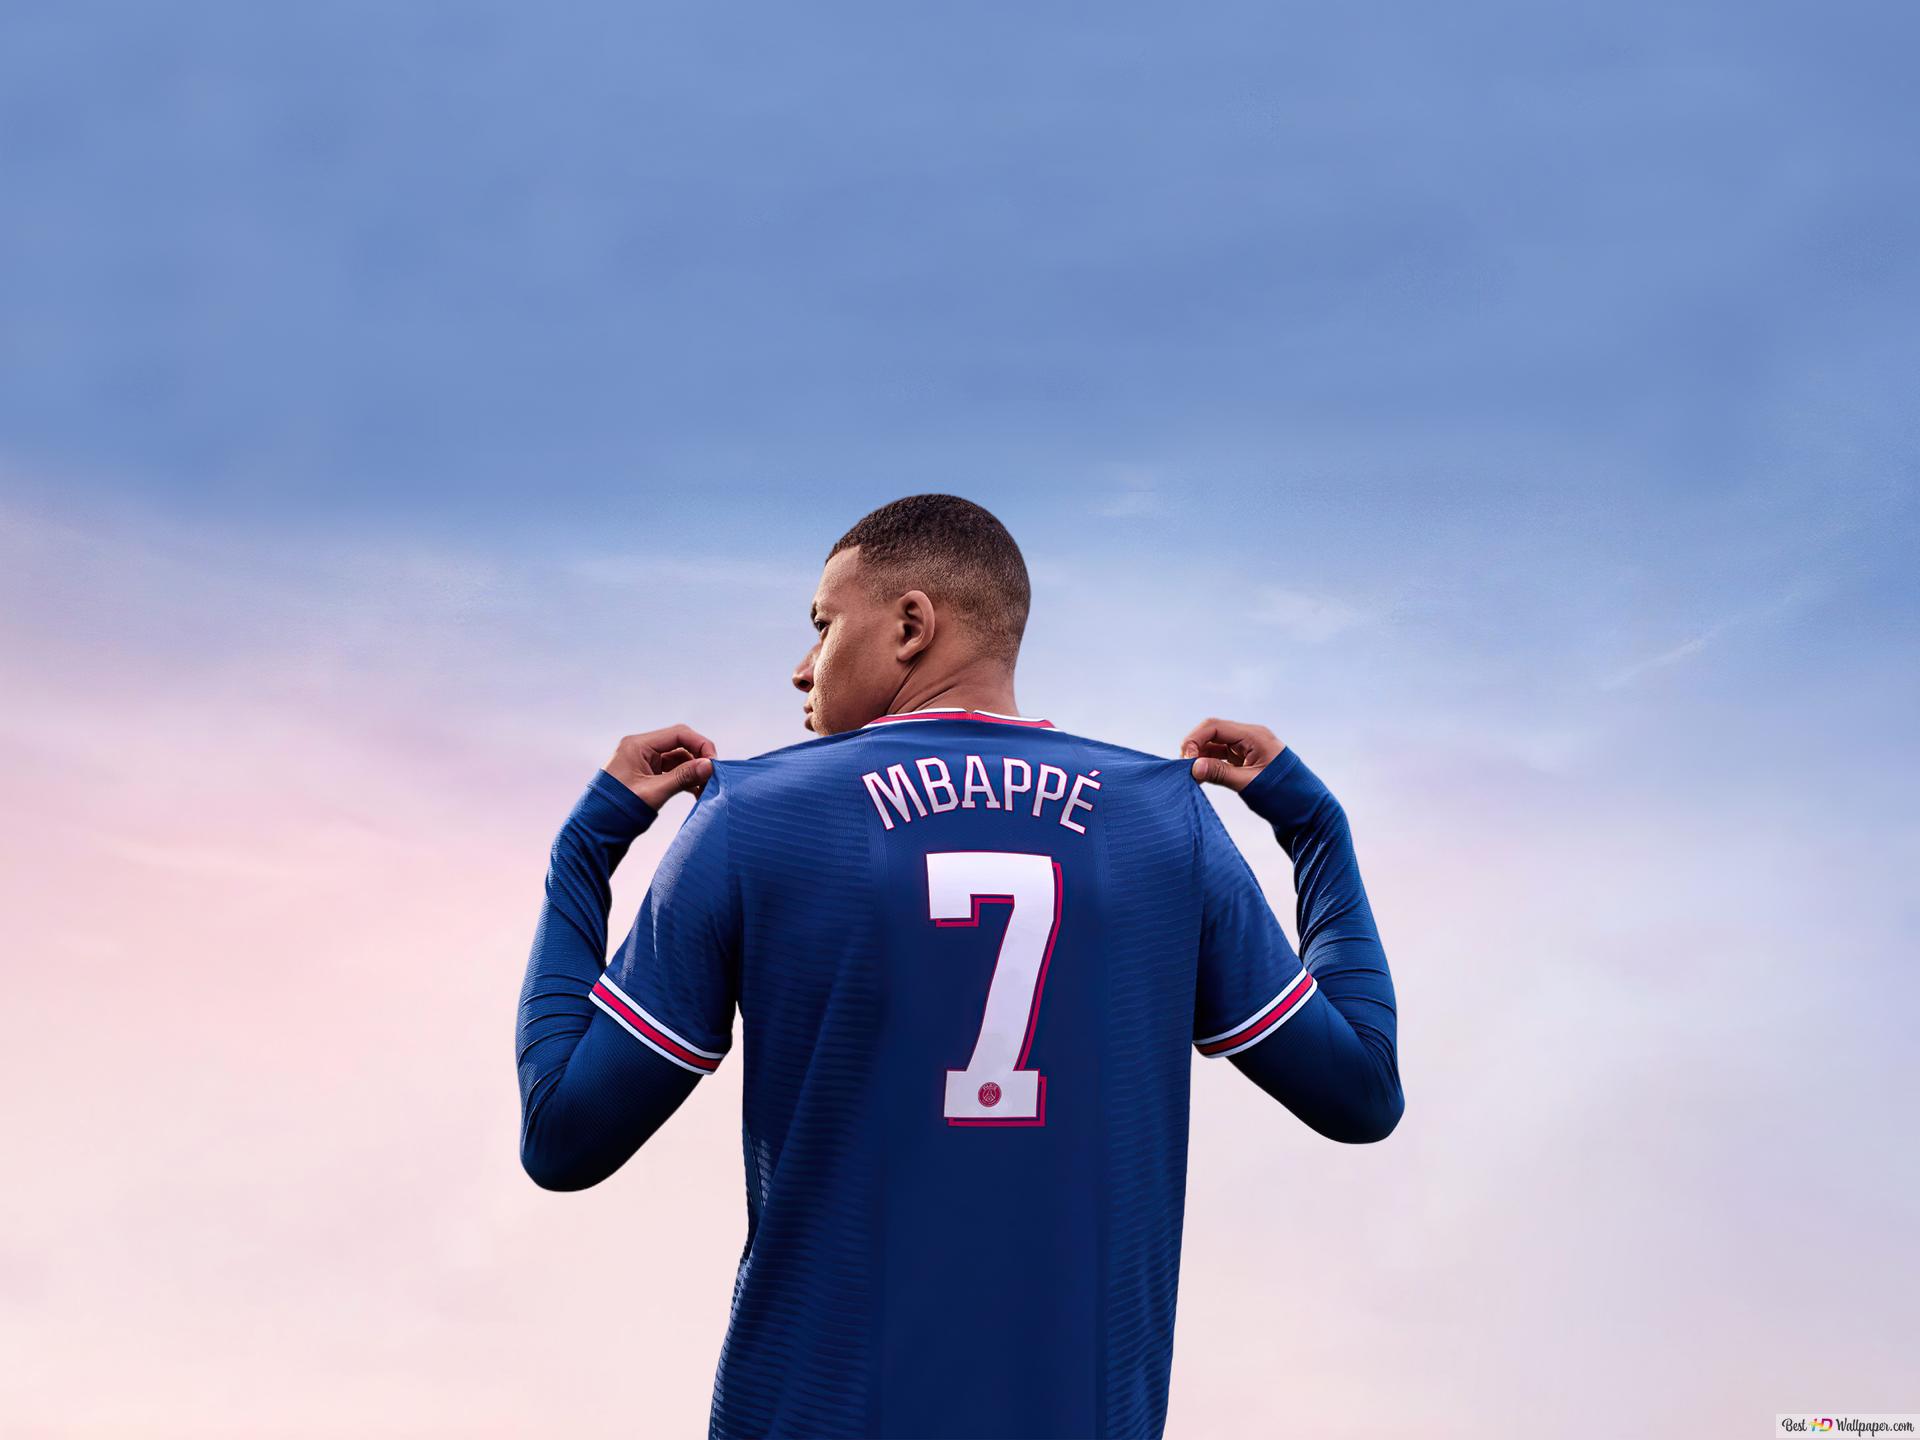 Kylian Mbappe, Player Of Paris Saint Germain, One Of The French Ligue 1 Teams, Number 7 Shirt 4K Wallpaper Download